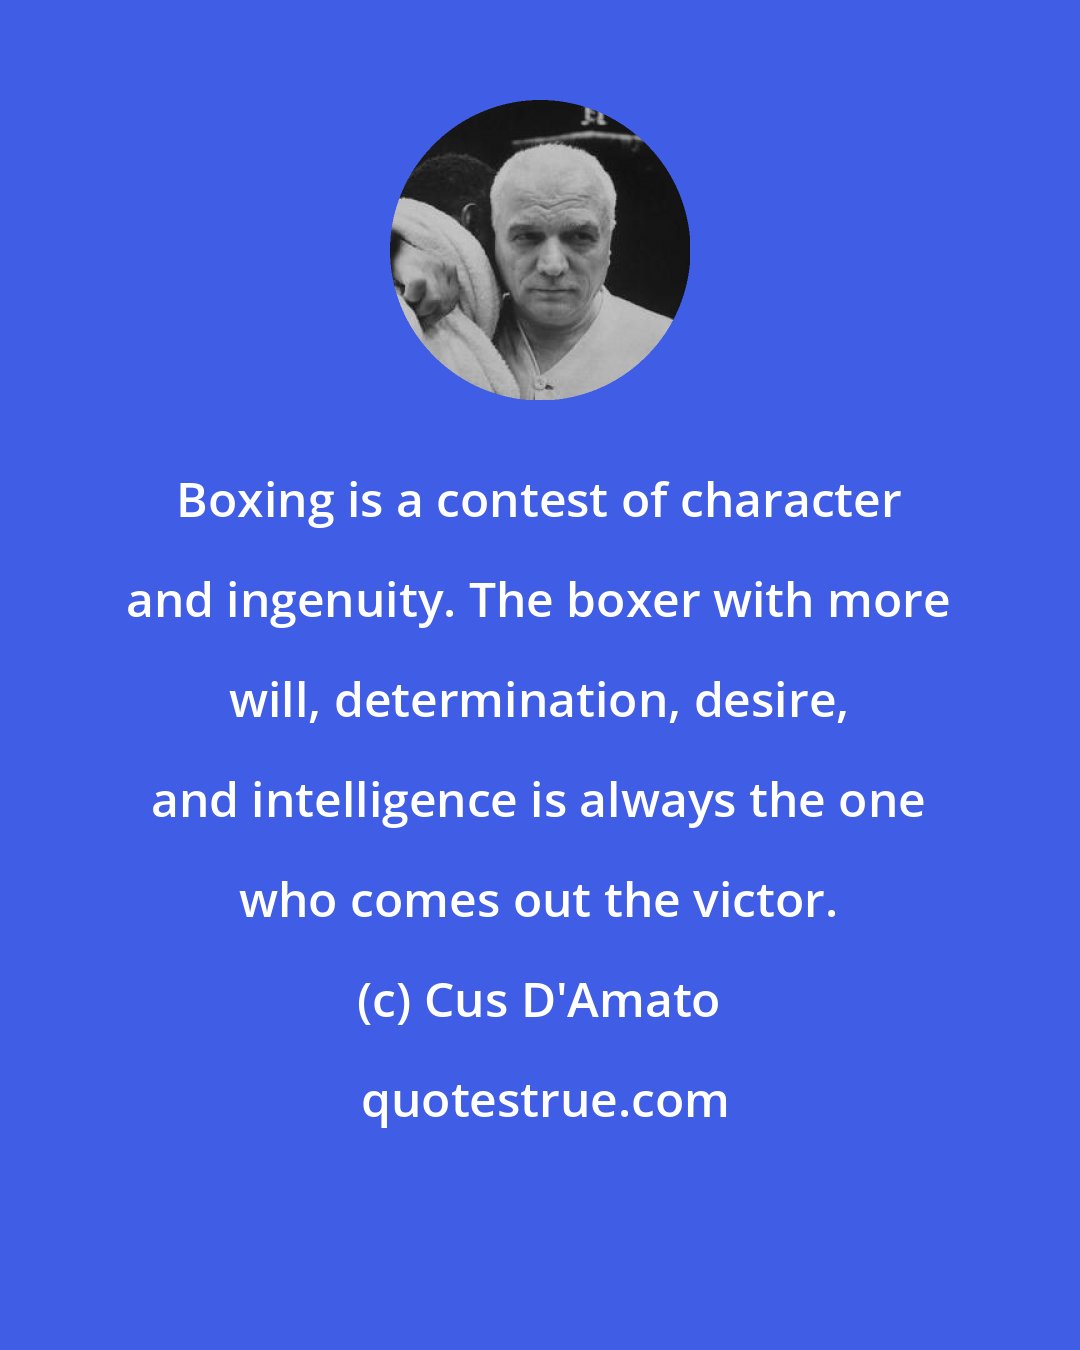 Cus D'Amato: Boxing is a contest of character and ingenuity. The boxer with more will, determination, desire, and intelligence is always the one who comes out the victor.